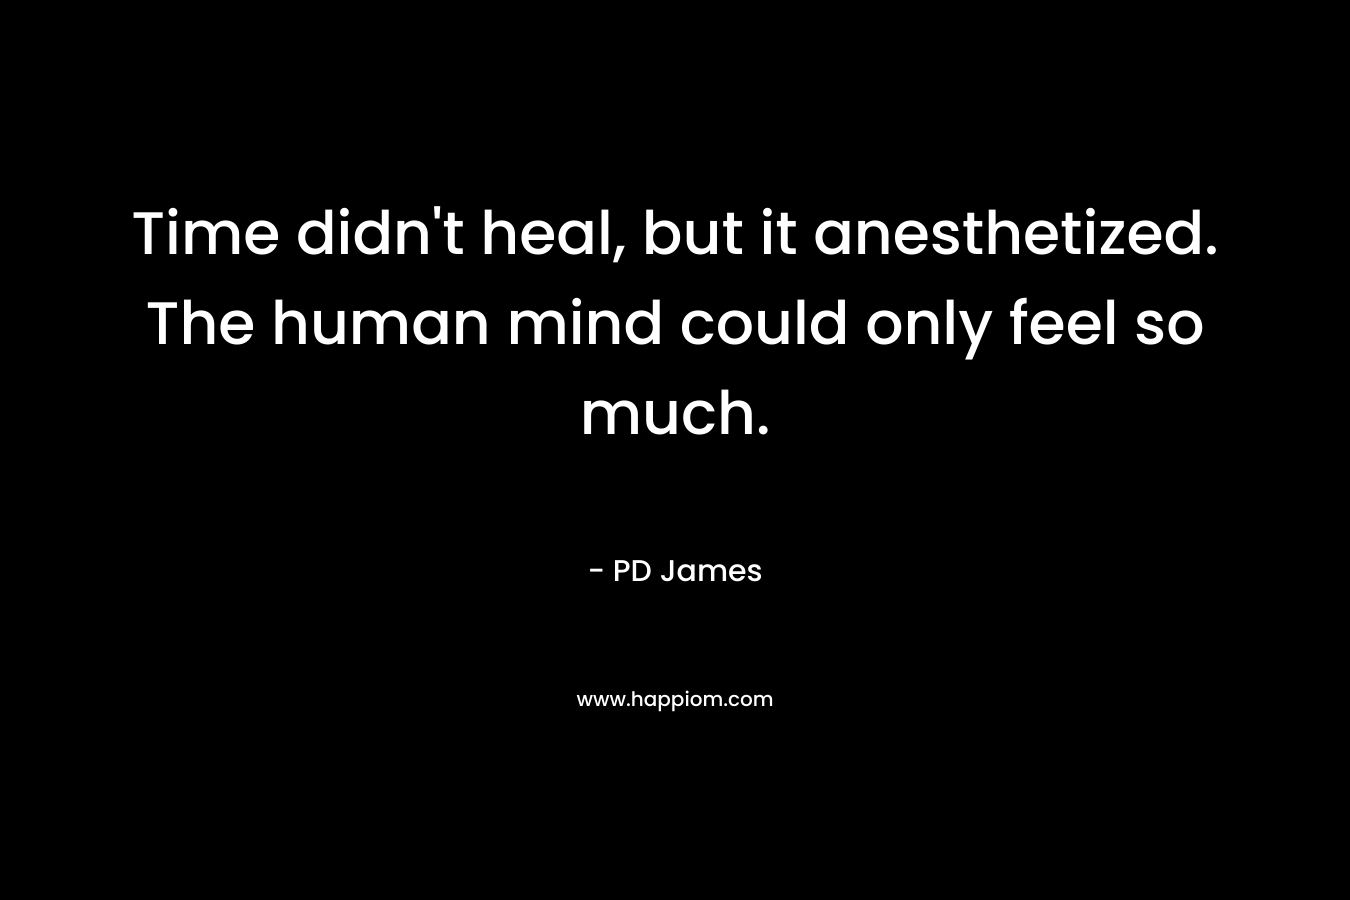 Time didn’t heal, but it anesthetized. The human mind could only feel so much. – PD James